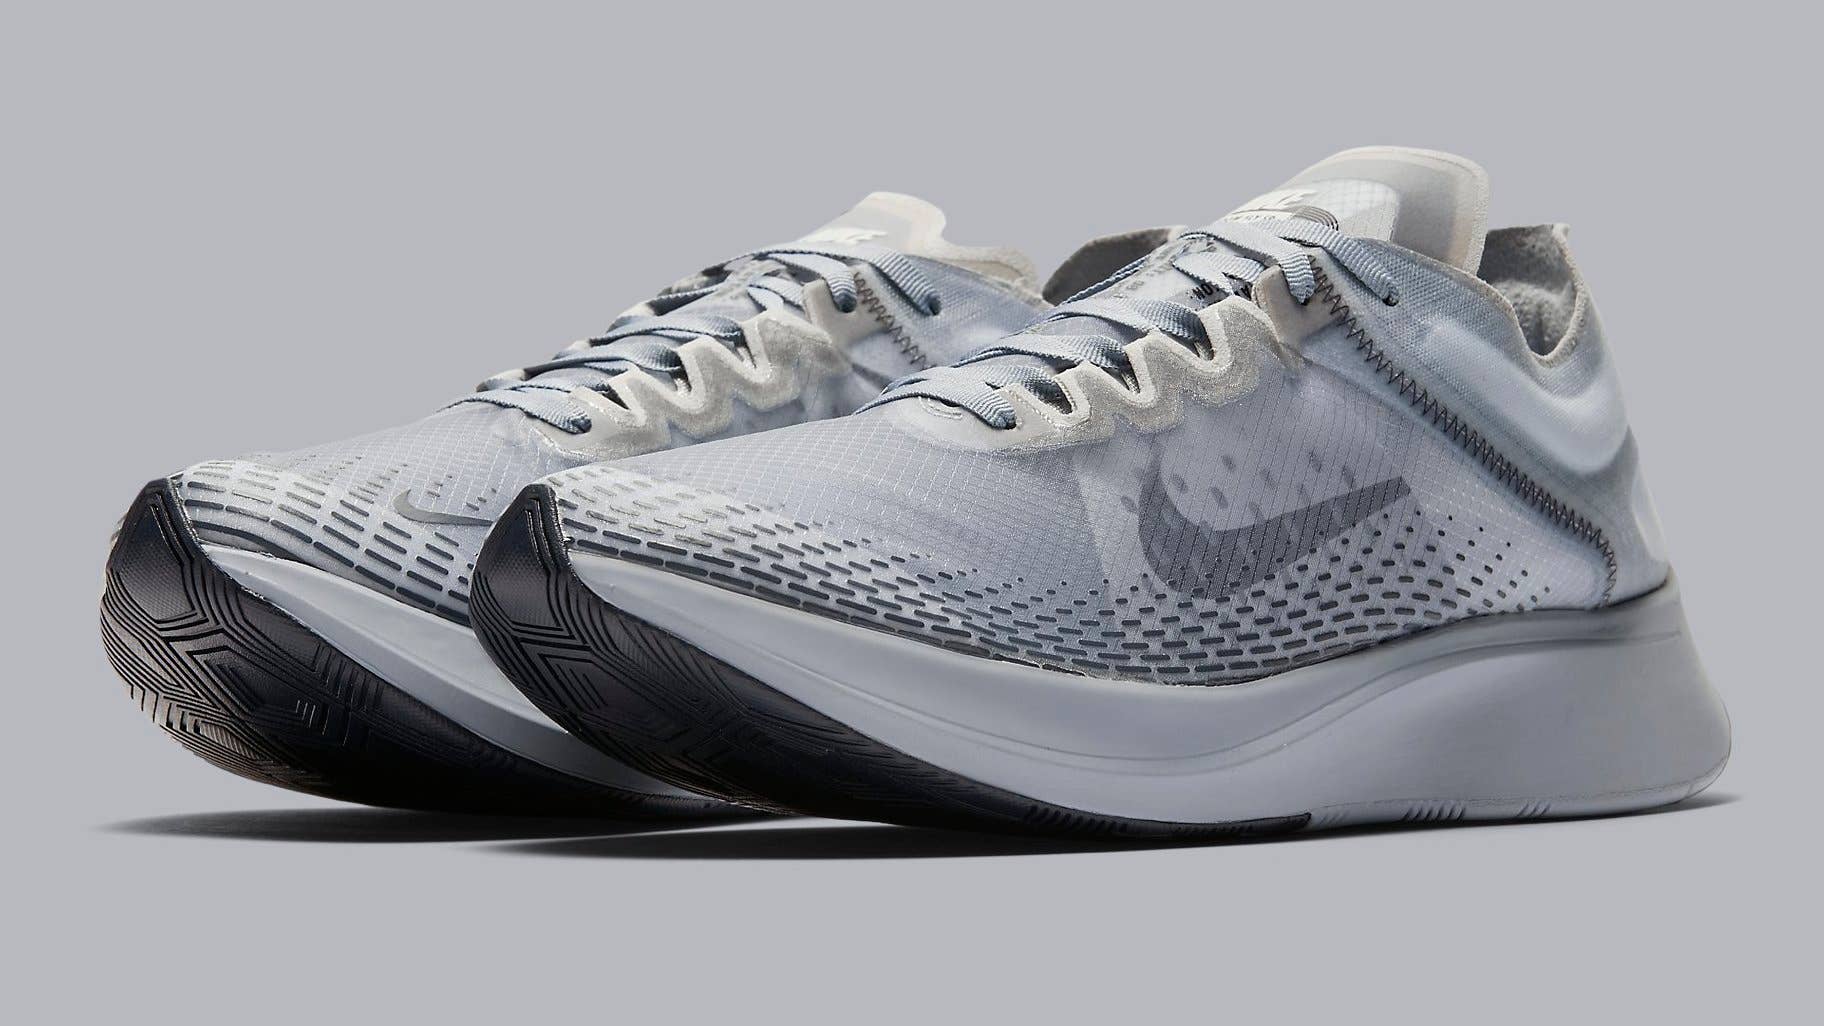 nike zoom fly sp fast release date obsidian mist at5242 440 pair